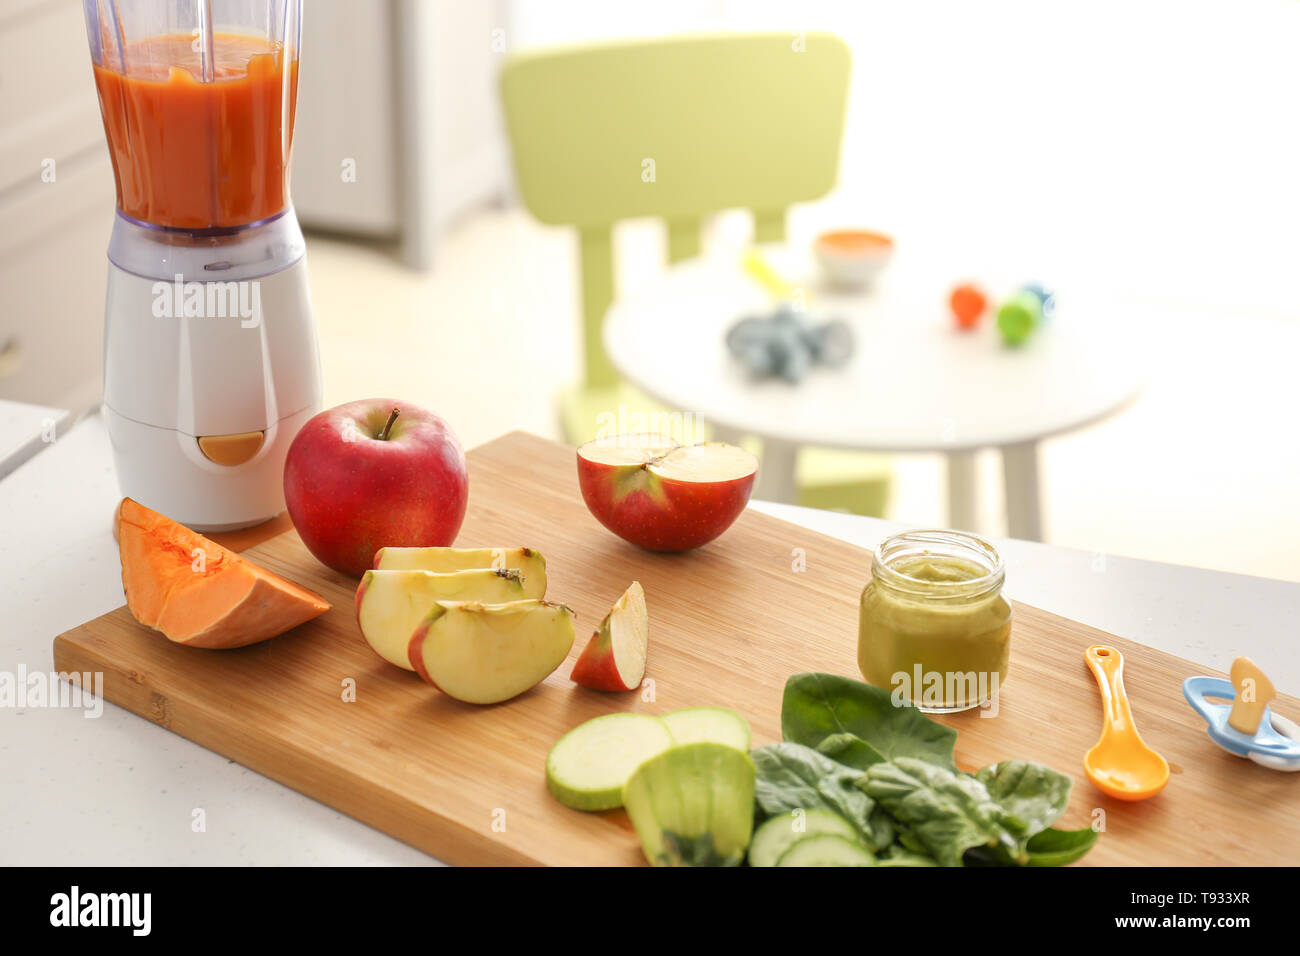 Wooden board with ingredients for baby food on kitchen table Stock Photo